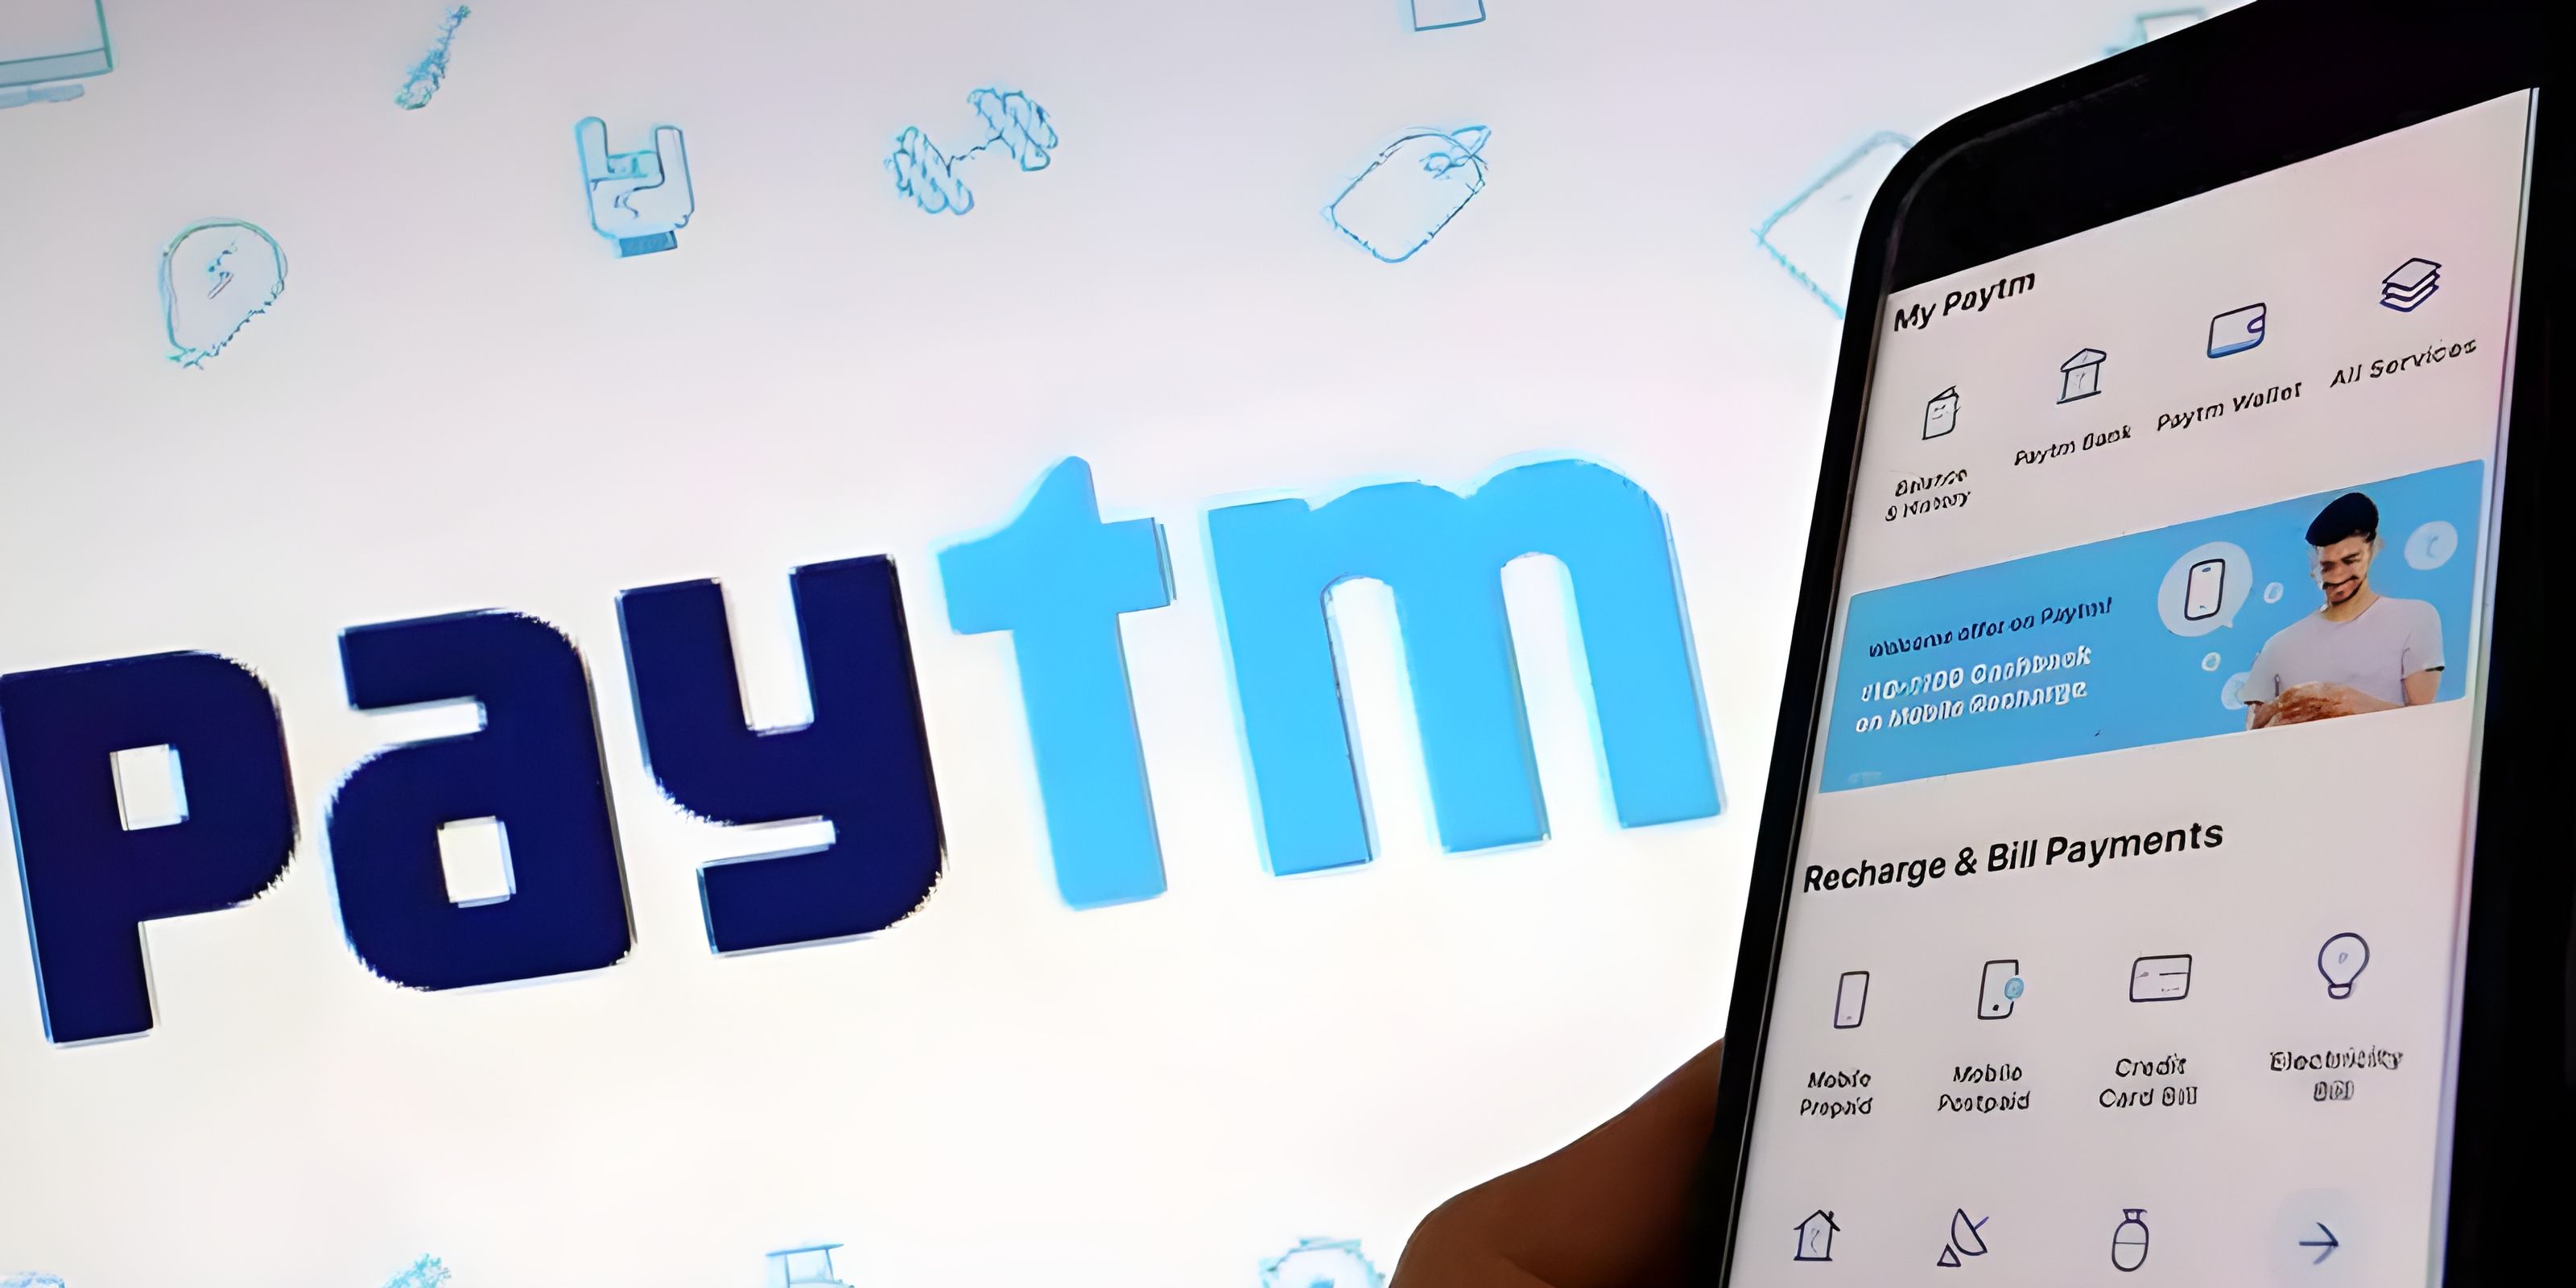 RBI stops Paytm Payments Bank from accepting deposits after Feb 29